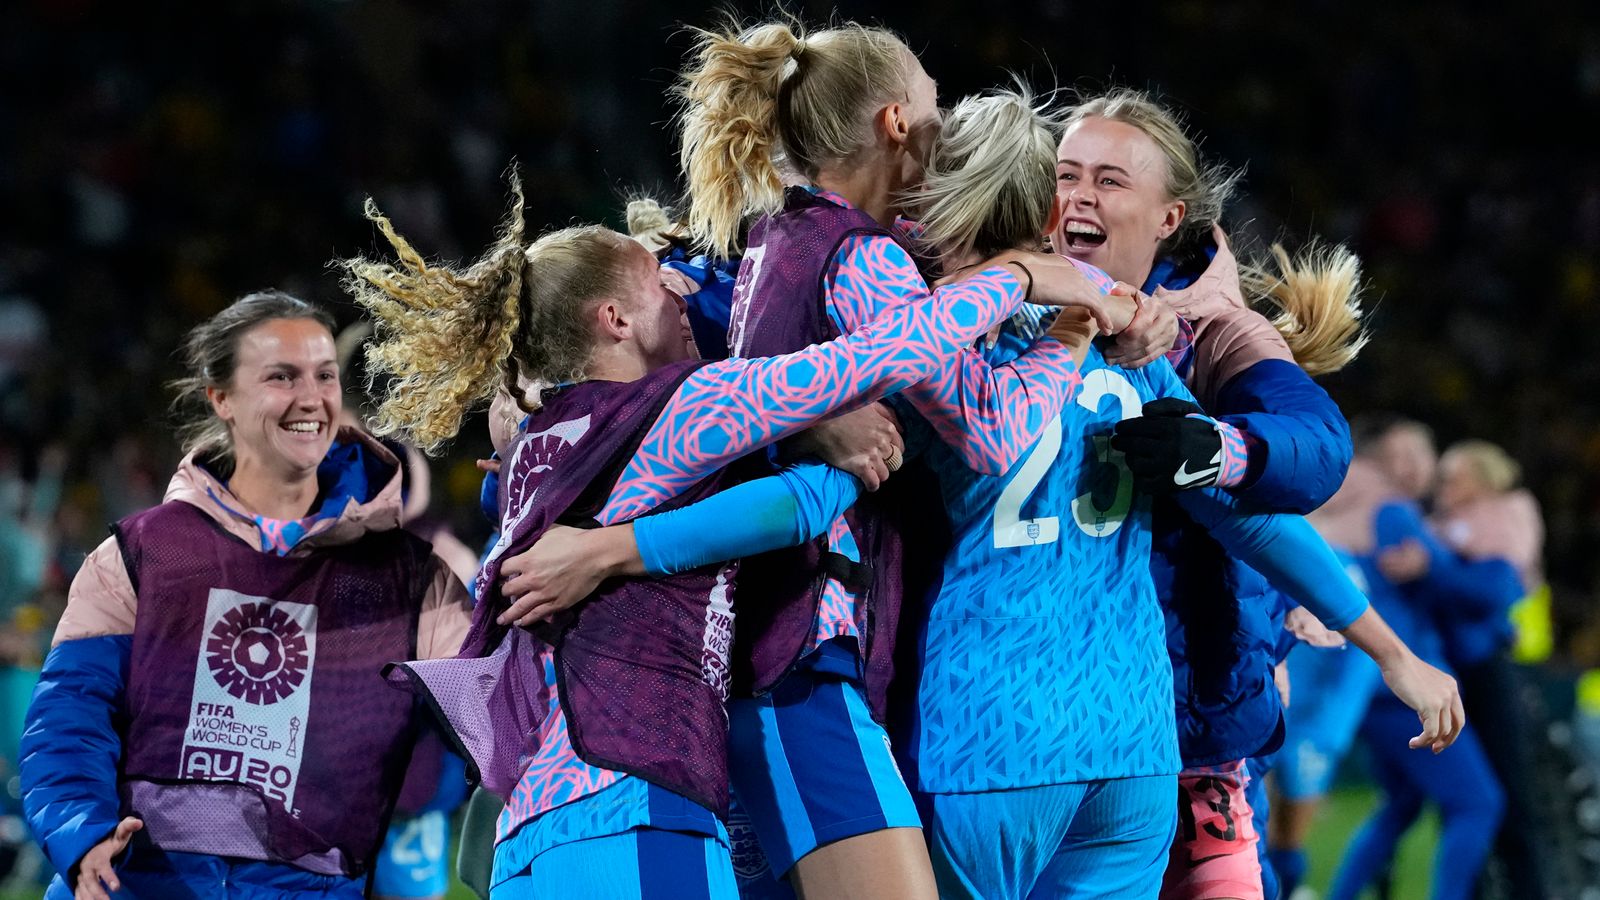 Women's World Cup final: King urges Lionesses to 'roar to victory' in historic match